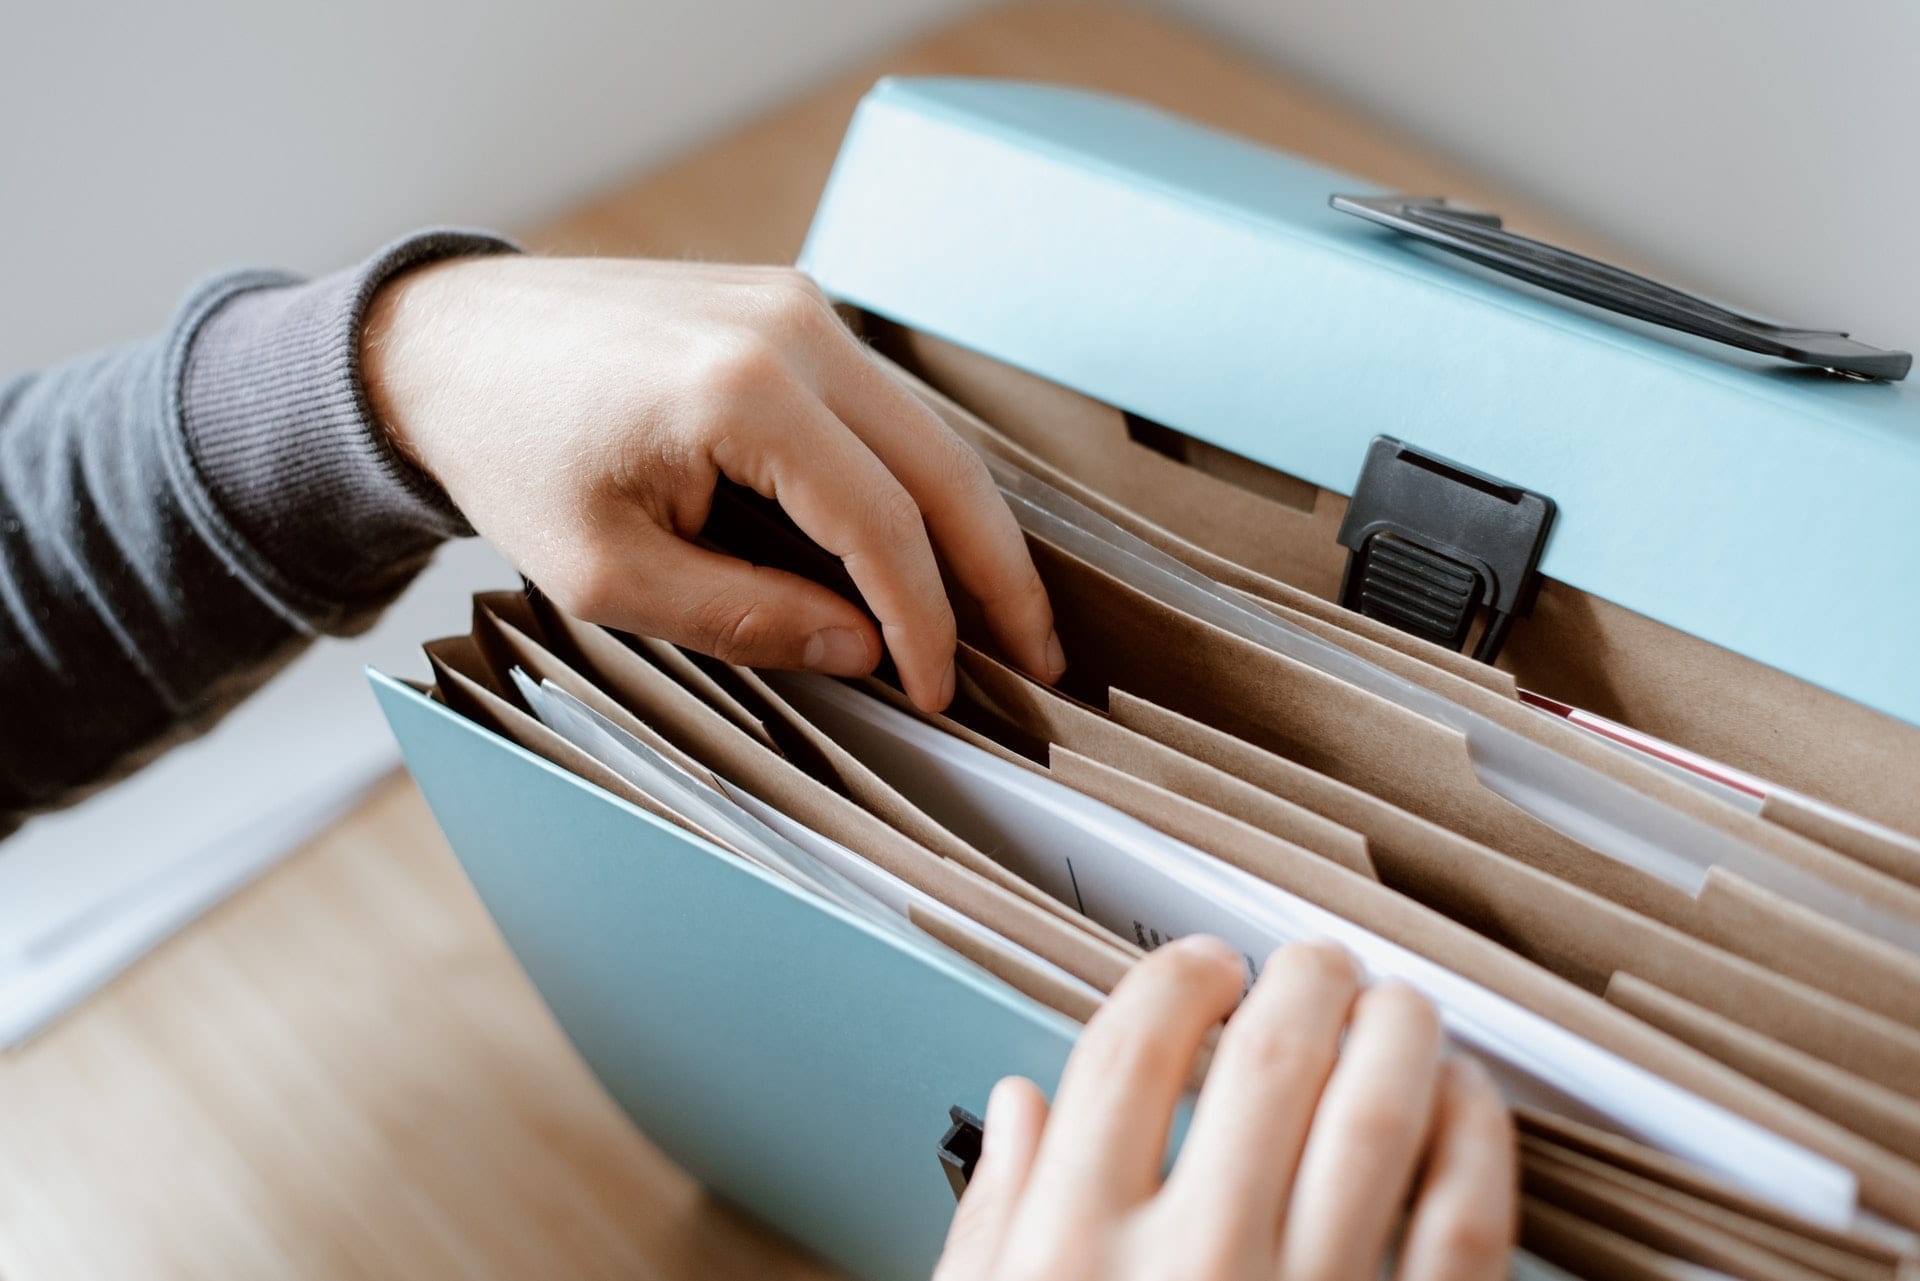 The key difference between sealed and expunged records is that sealed records still exist.